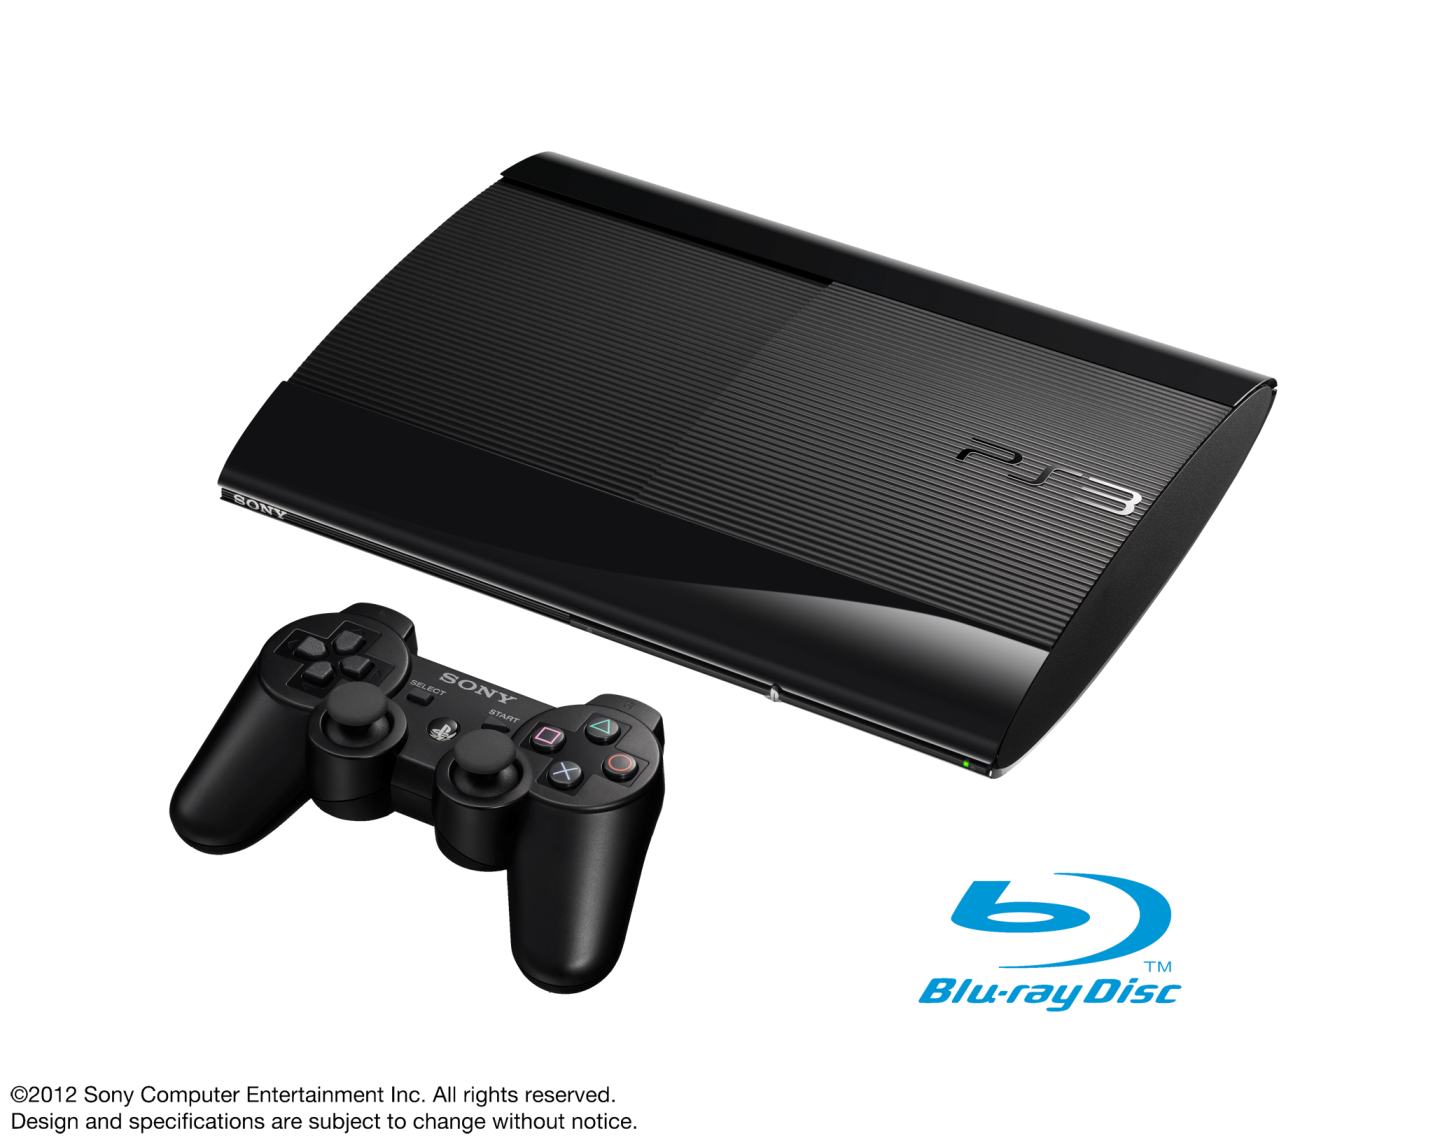 New PS3 announced